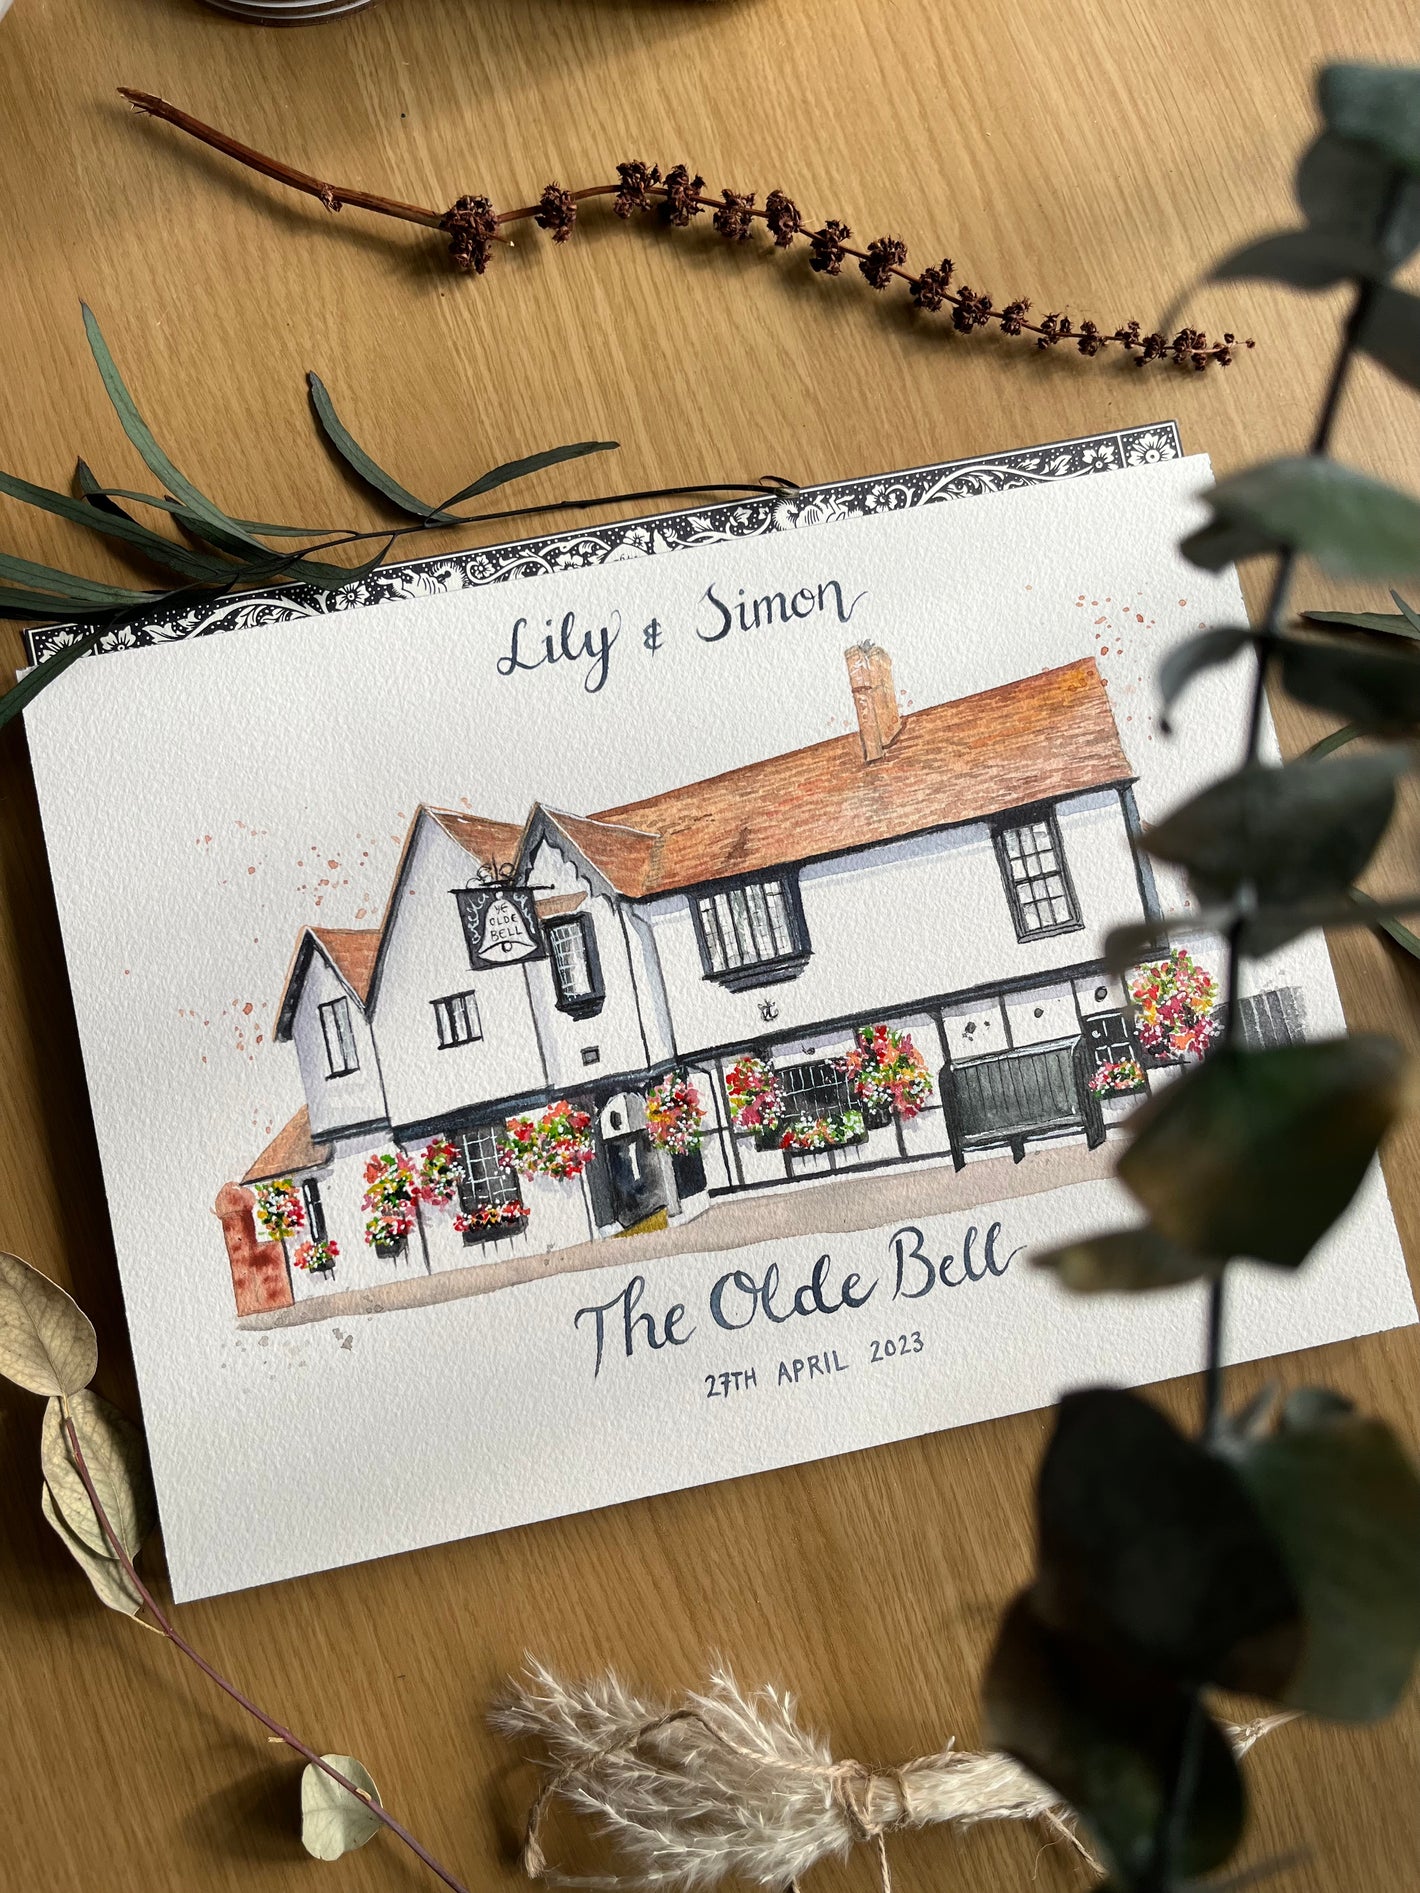 Bespoke wedding venue illustration of The Olde Bell in Hurley, painted in watercolours by Lincolnshire artist, Eve Leoni Art.